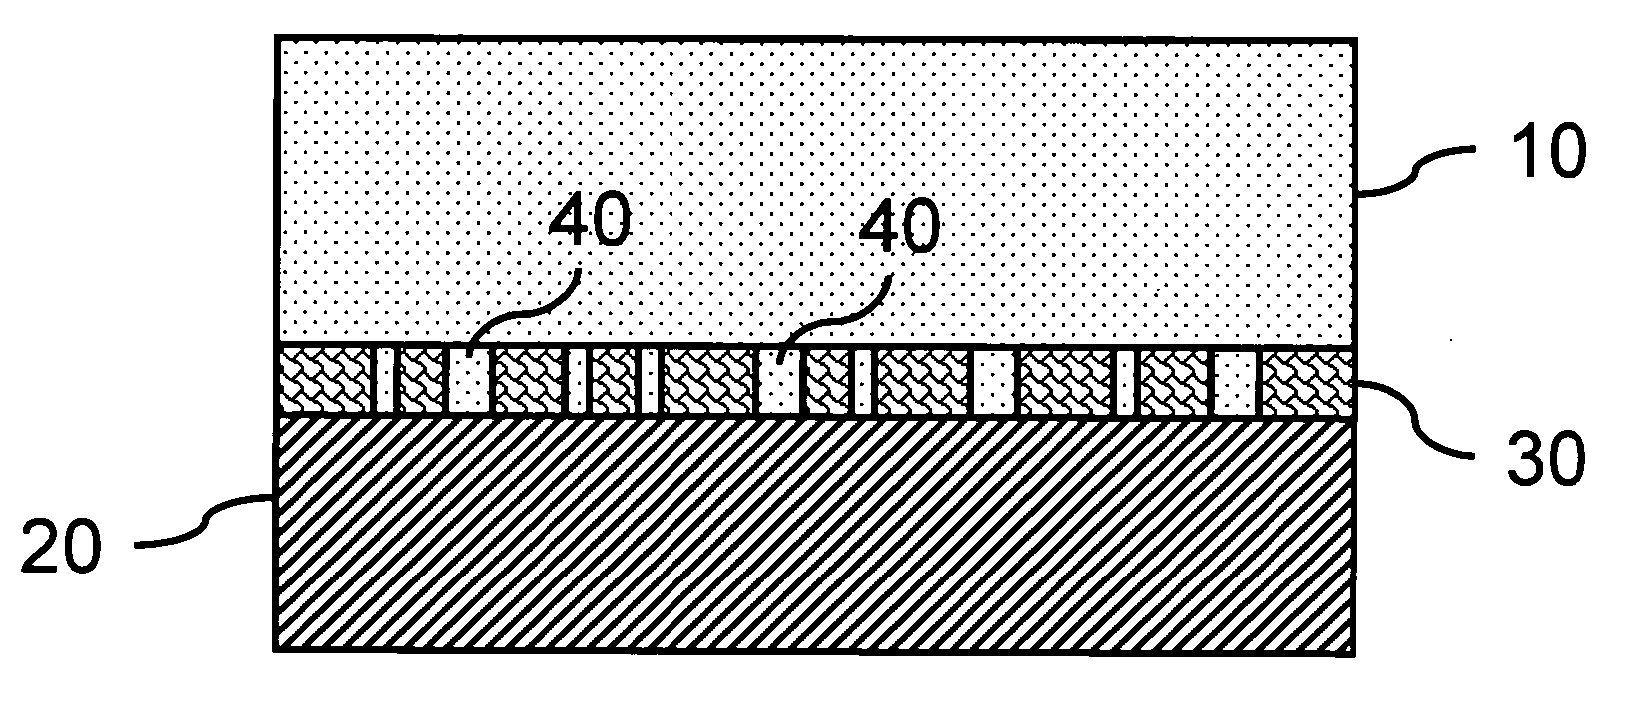 Phase change memory and fabricating method thereof